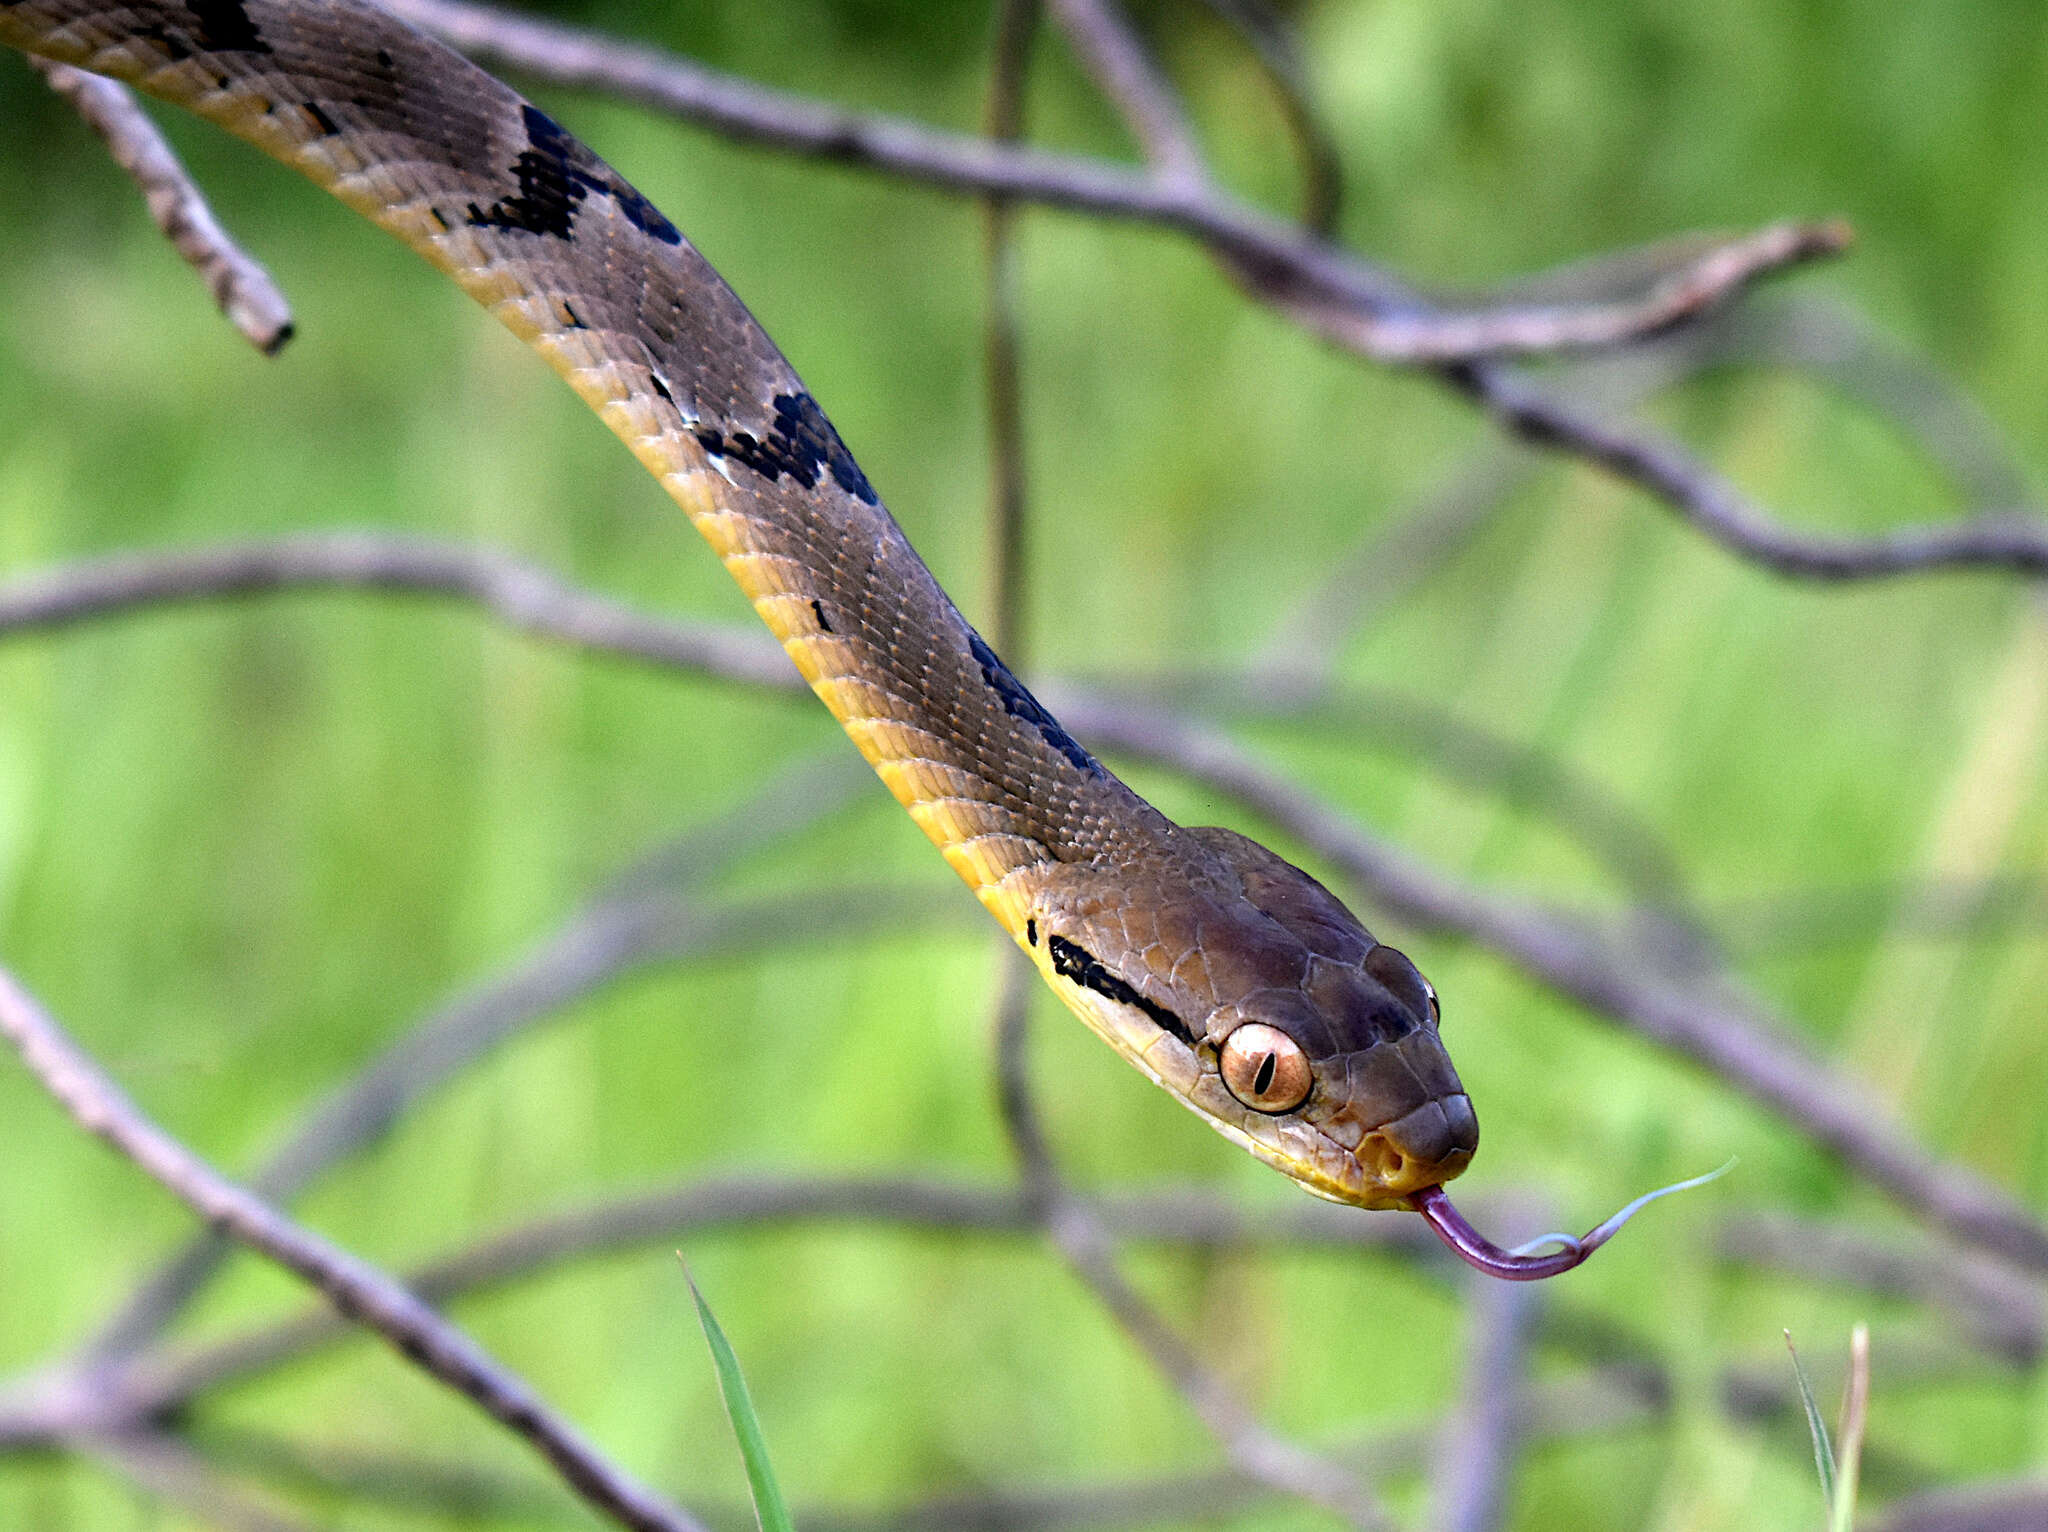 Image of Dog-toothed Cat Snake